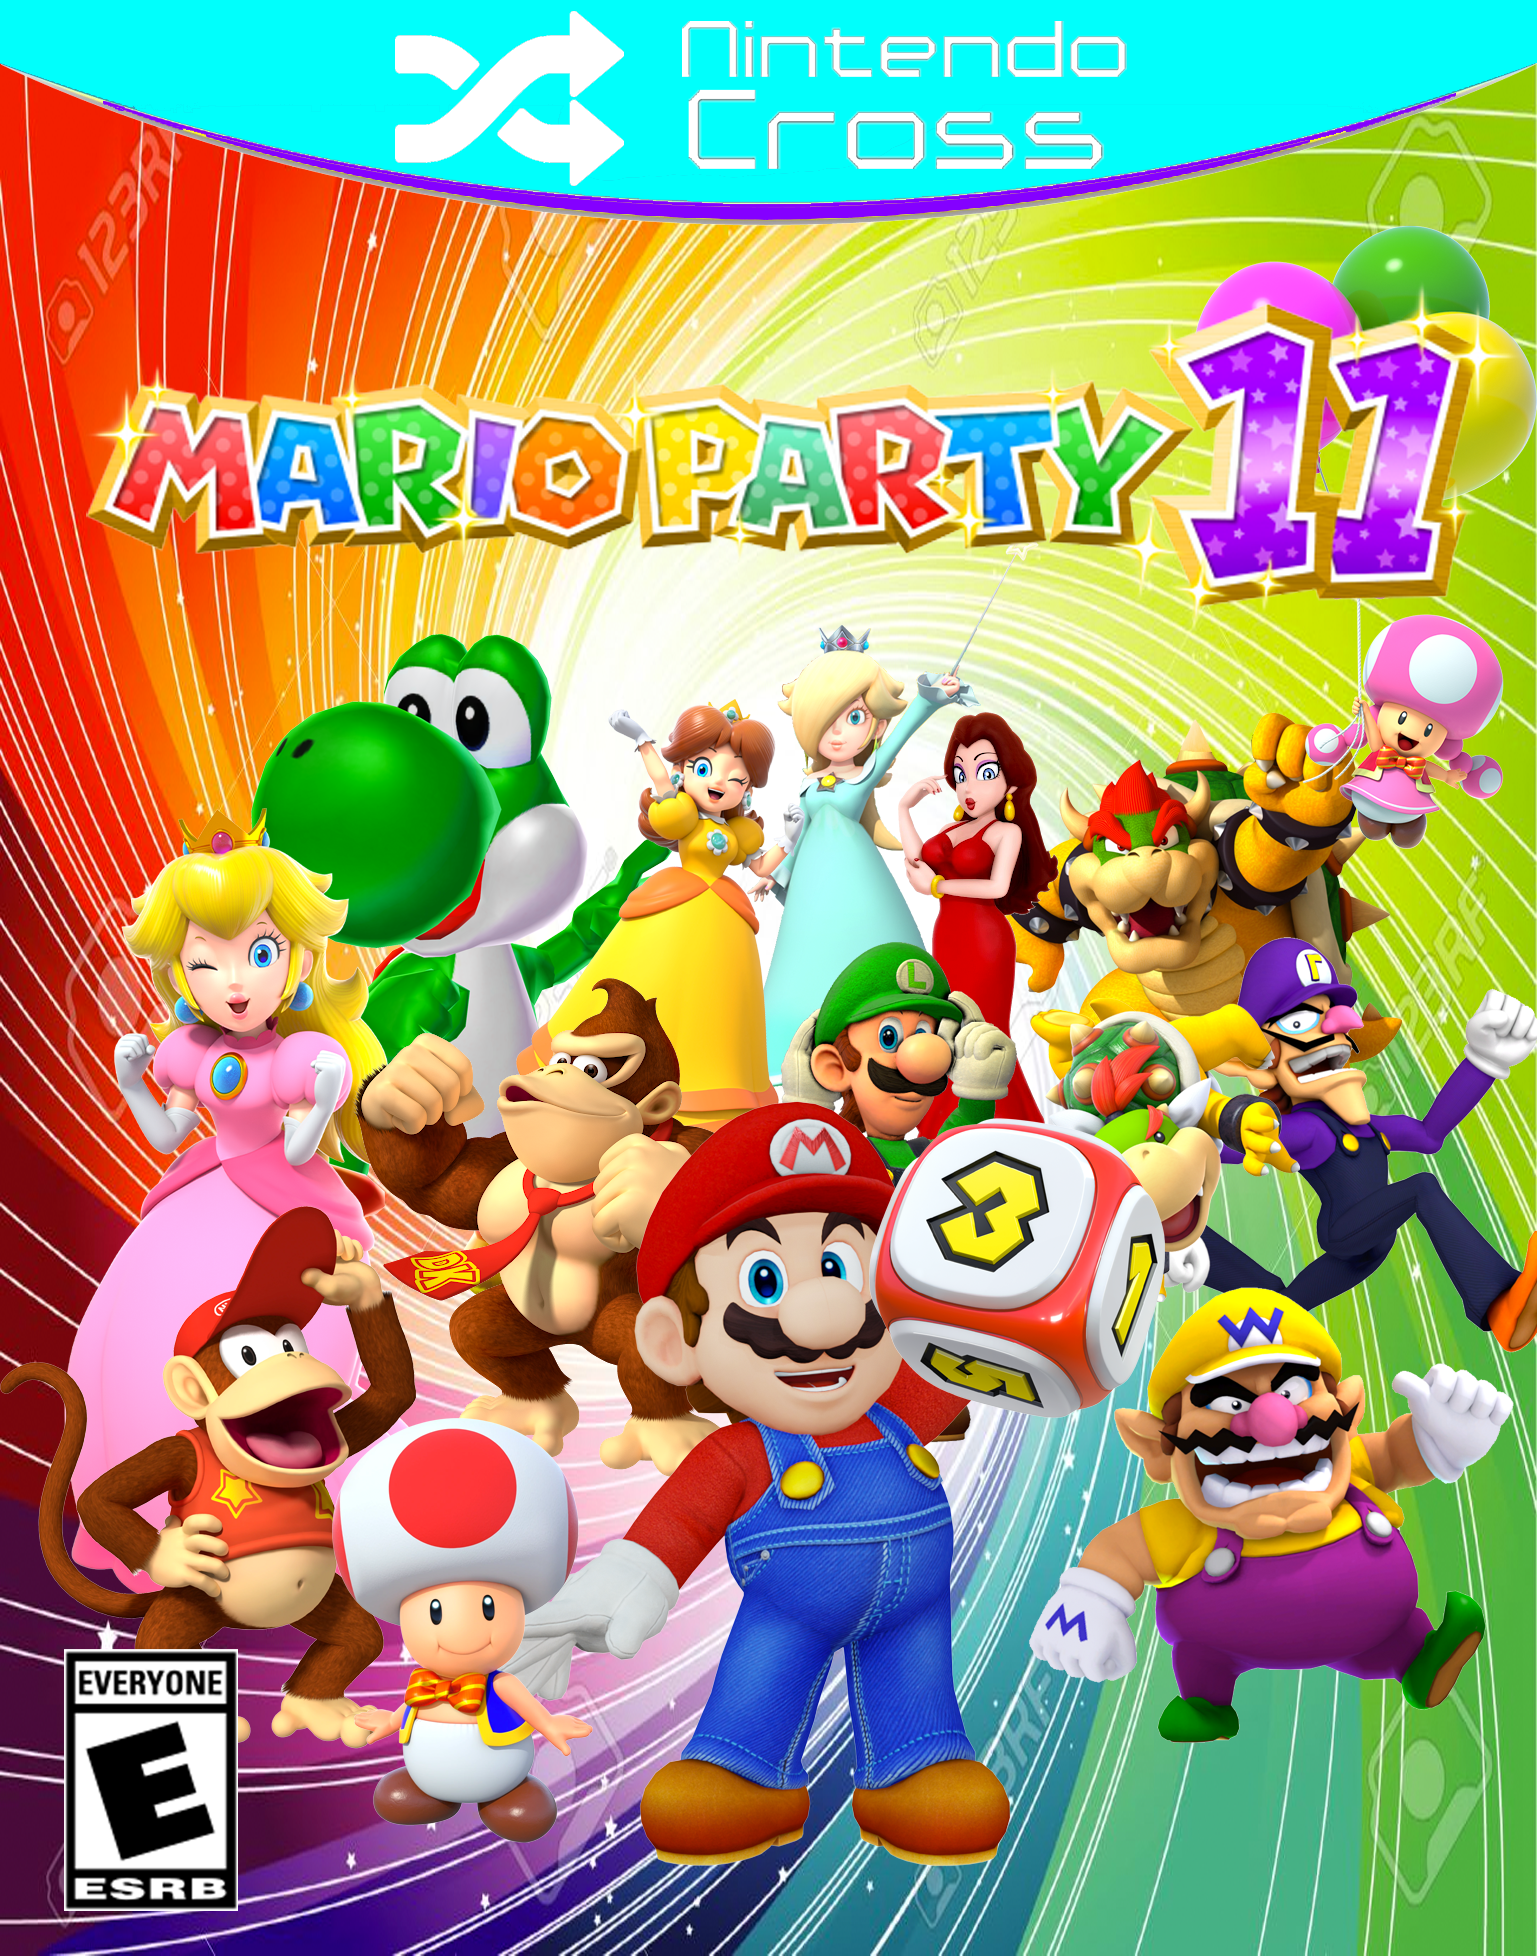 How to Play Online - All Online Modes - Mario Party Superstars